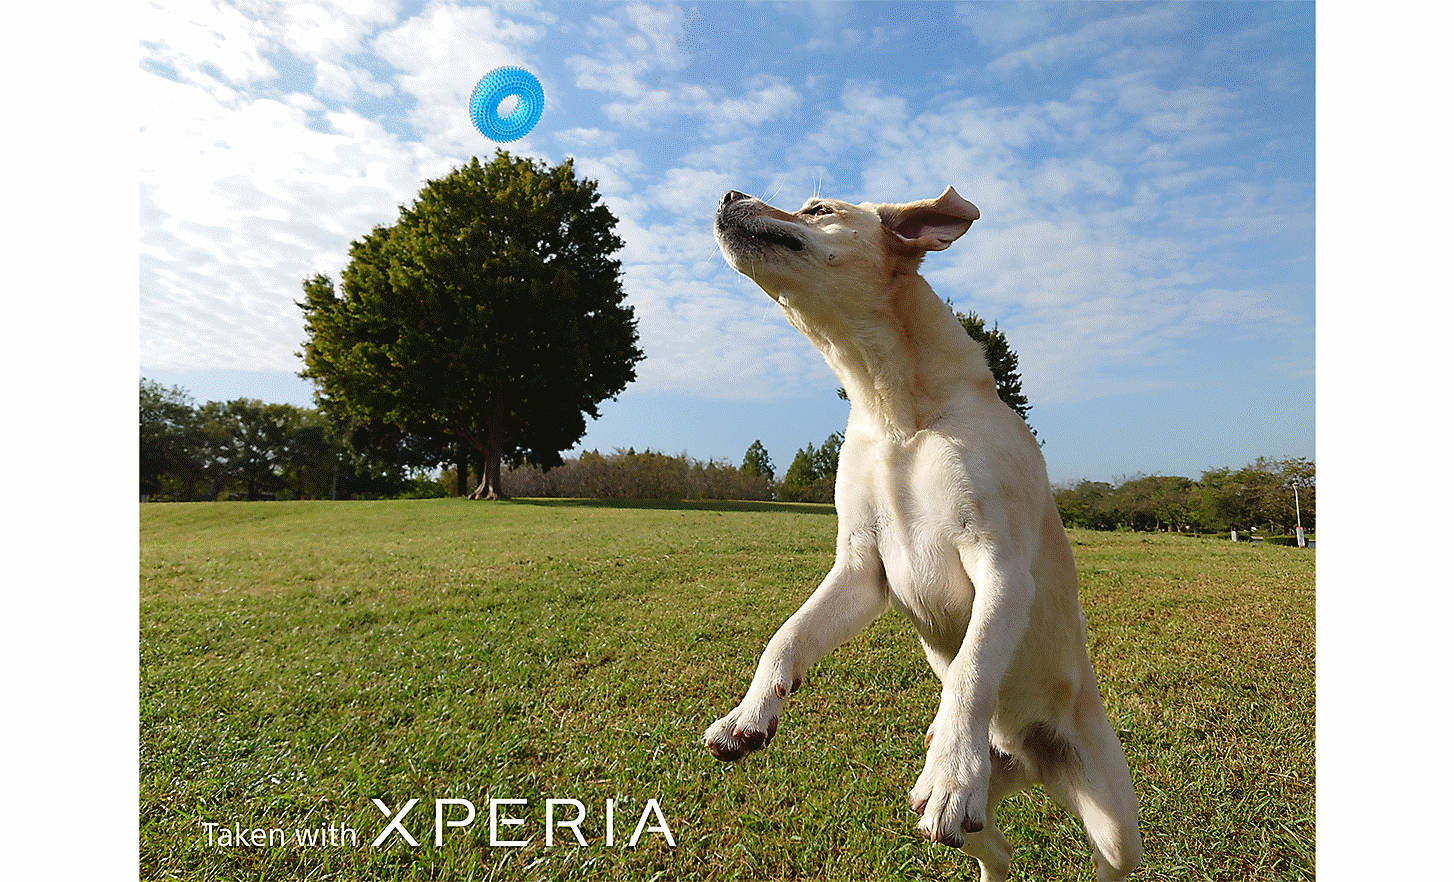 Action shot of a dog in a field, leaping to catch a blue toy. Text reads "Taken with XPERIA".